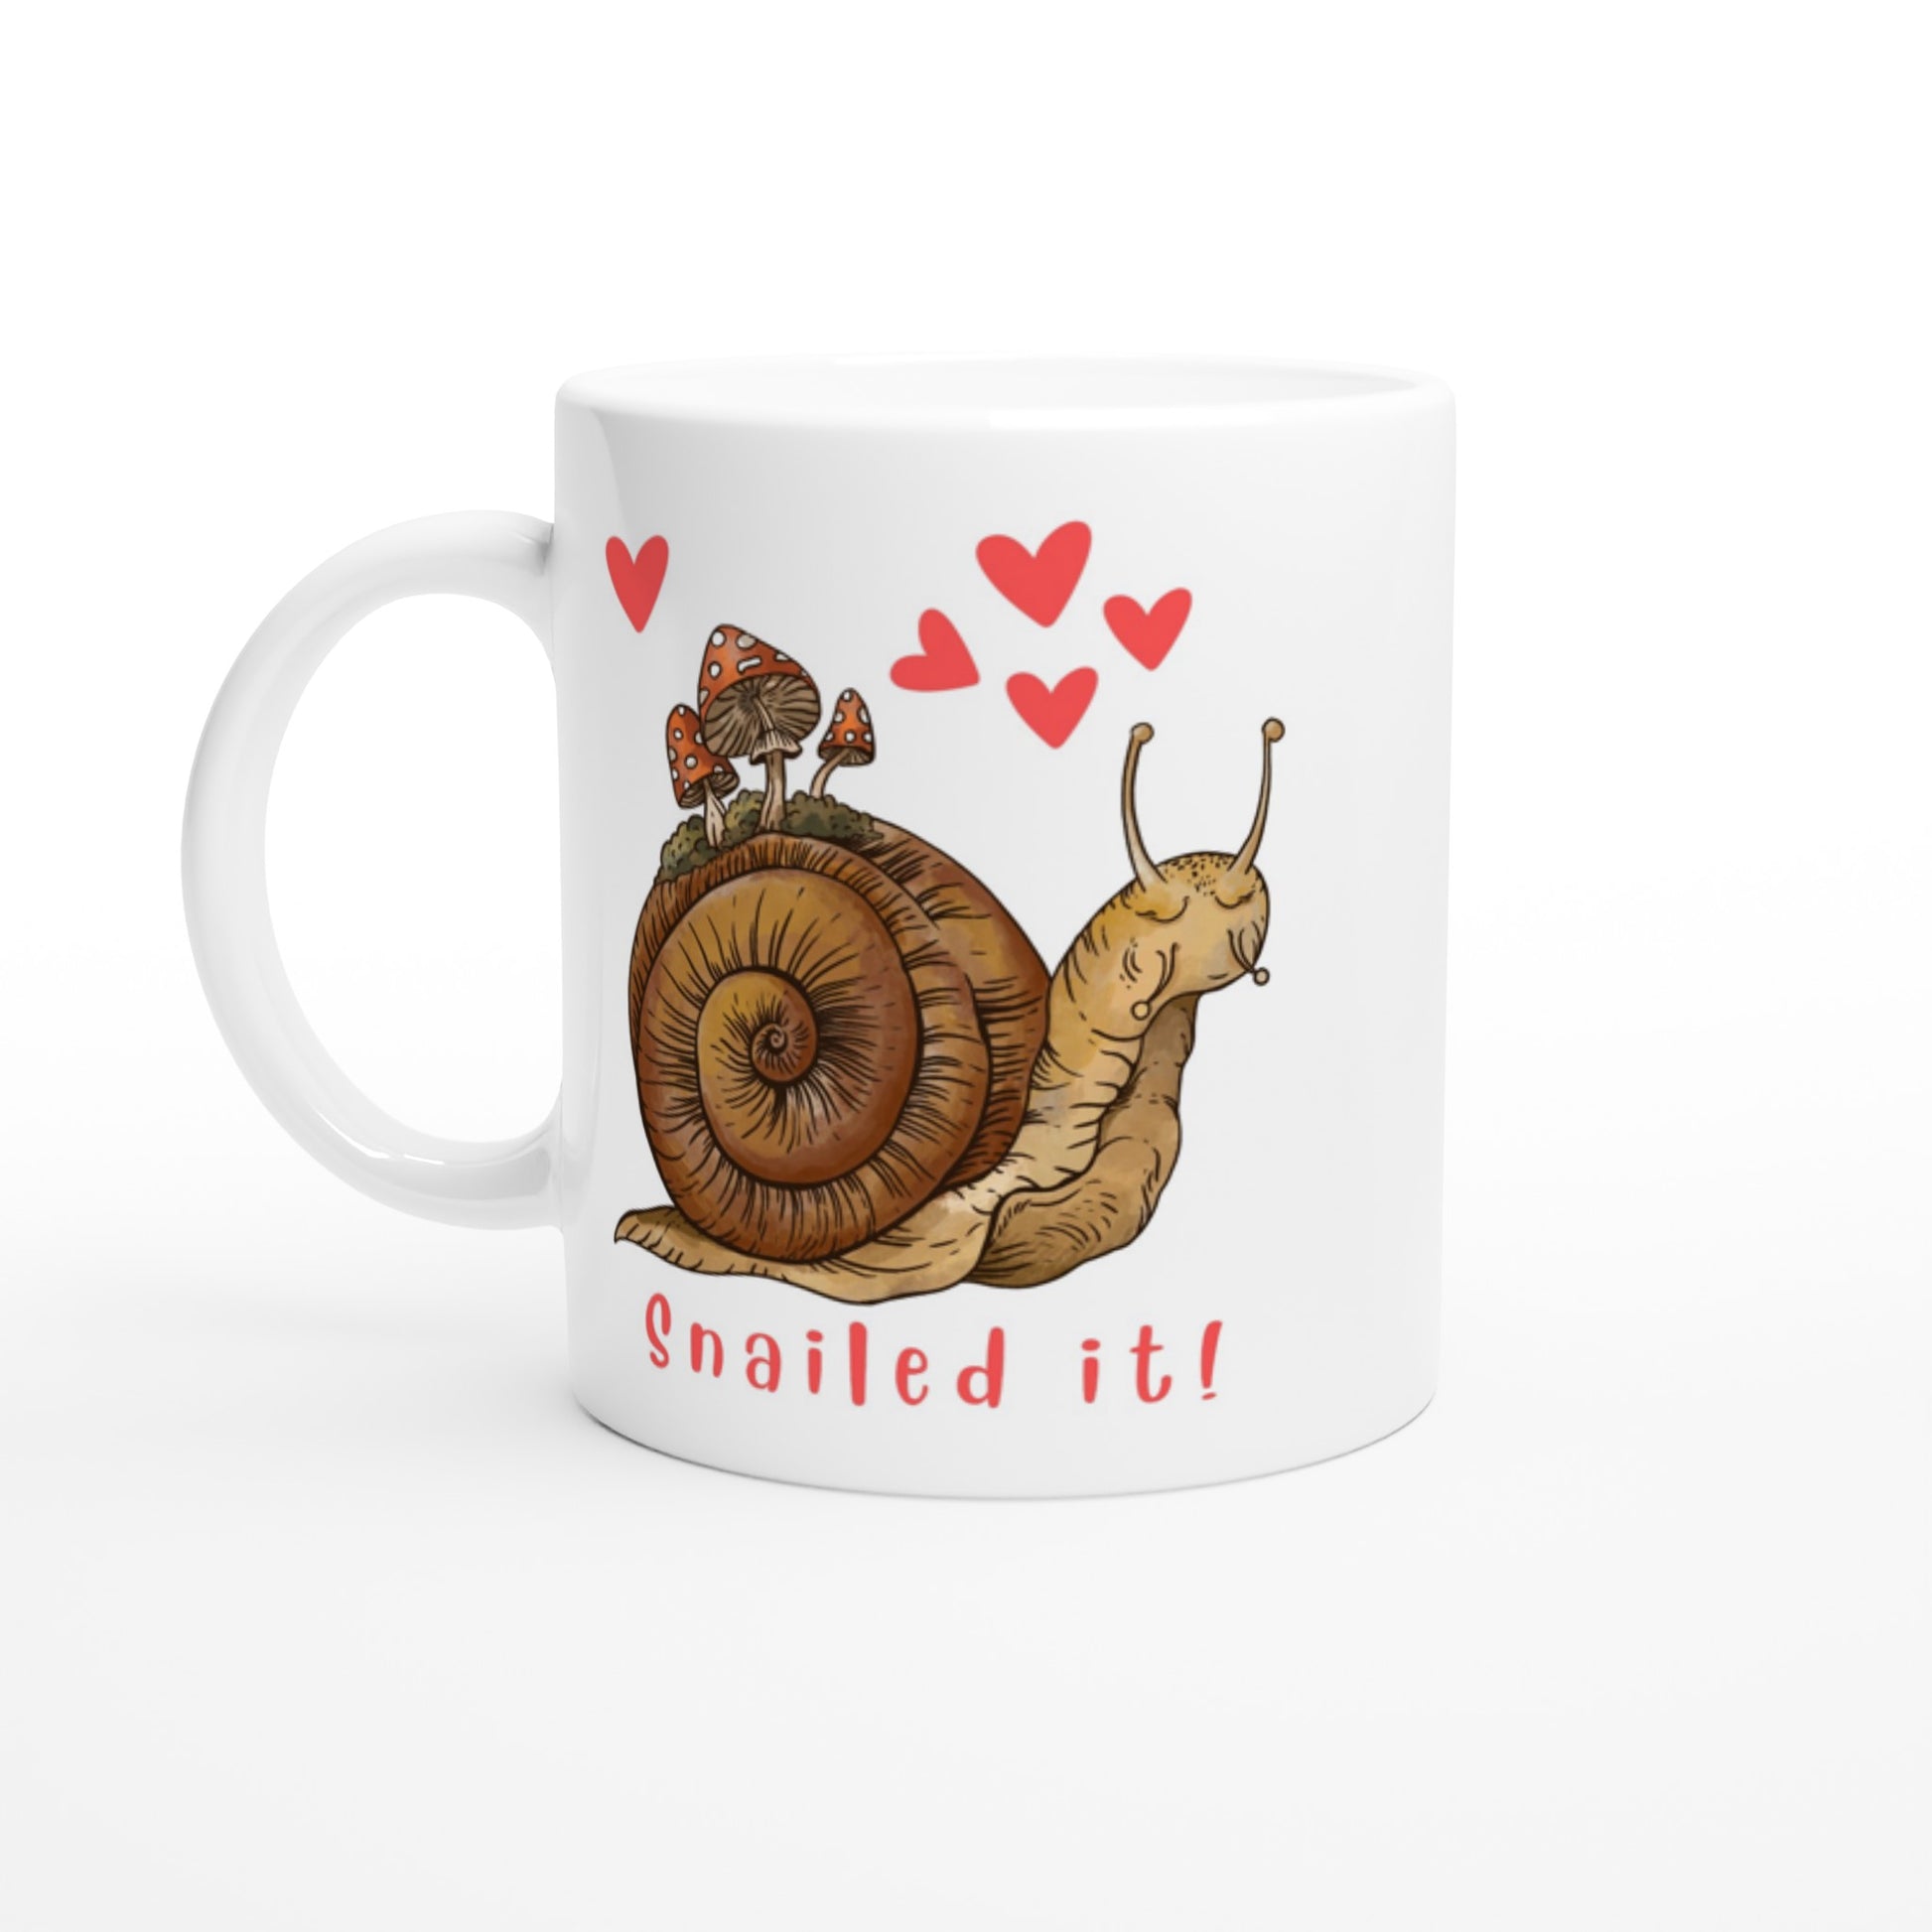 snailed it coffee cup.